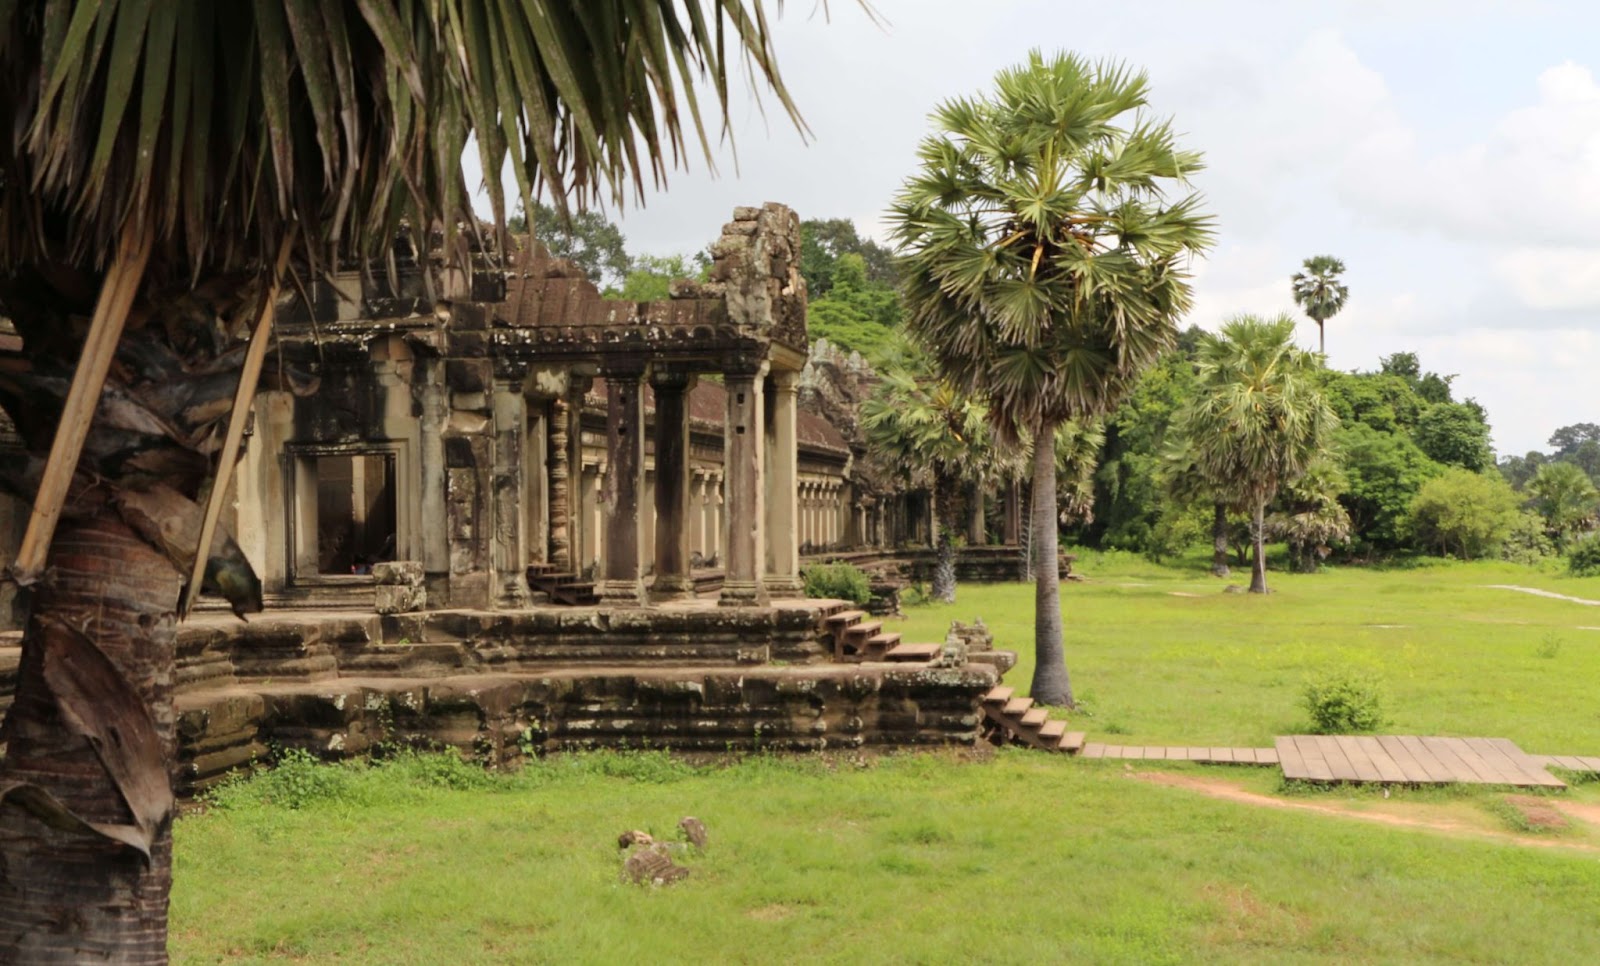 3 days in Siem Reap. This is another entrance to the Angkor Wat temple.